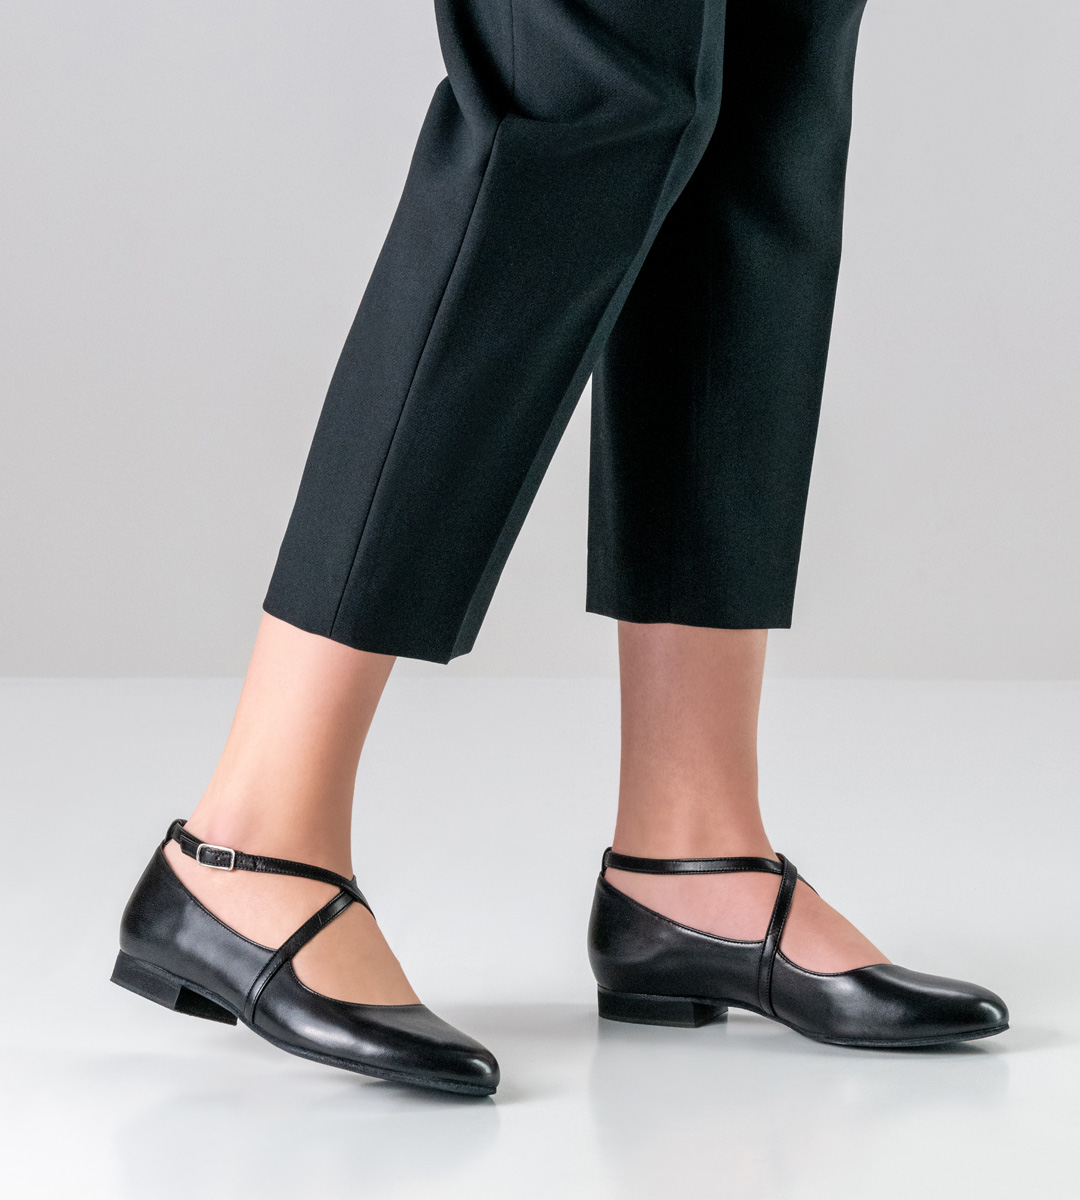 black trousers in combination with closed Werner Kern ladies dance shoe in black